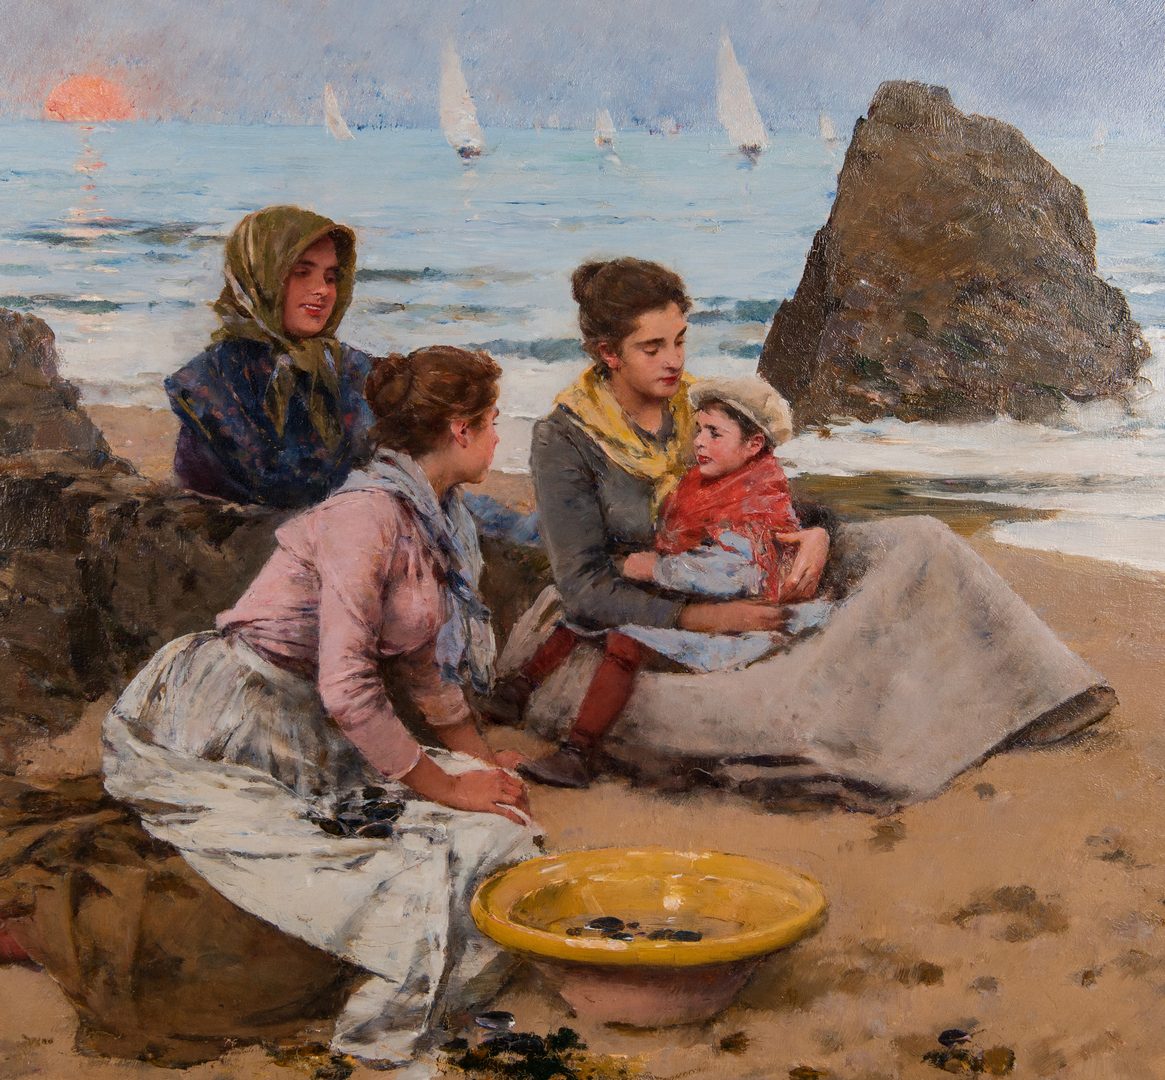 Lot 103: Francisco Miralles y Galup Oil, Beach Scene at Dusk